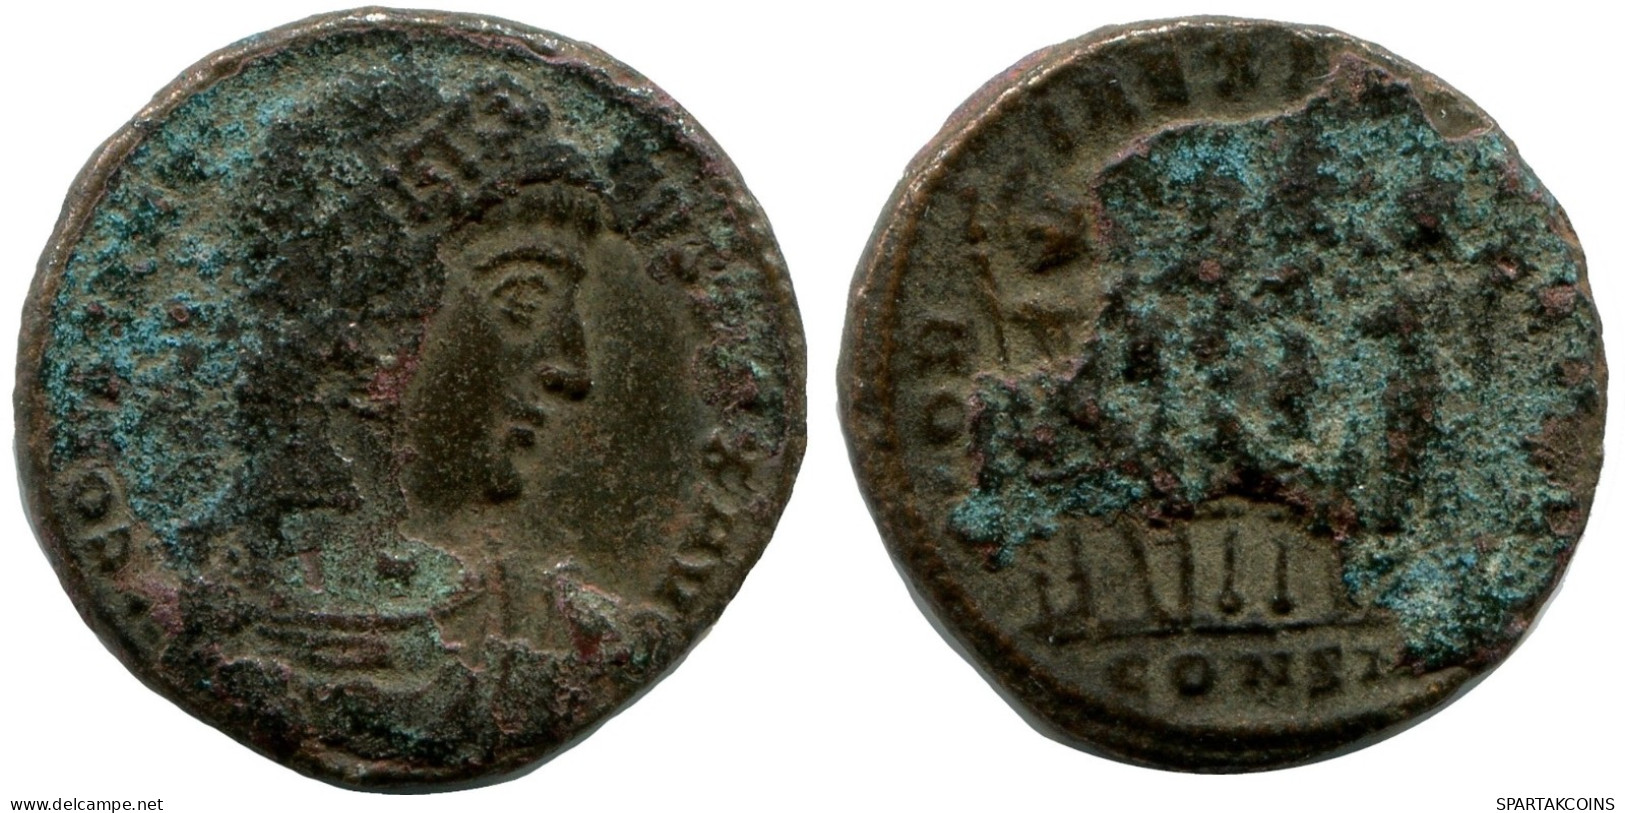 CONSTANTINE I CONSTANTINOPLE FROM THE ROYAL ONTARIO MUSEUM #ANC10771.14.D.A - L'Empire Chrétien (307 à 363)